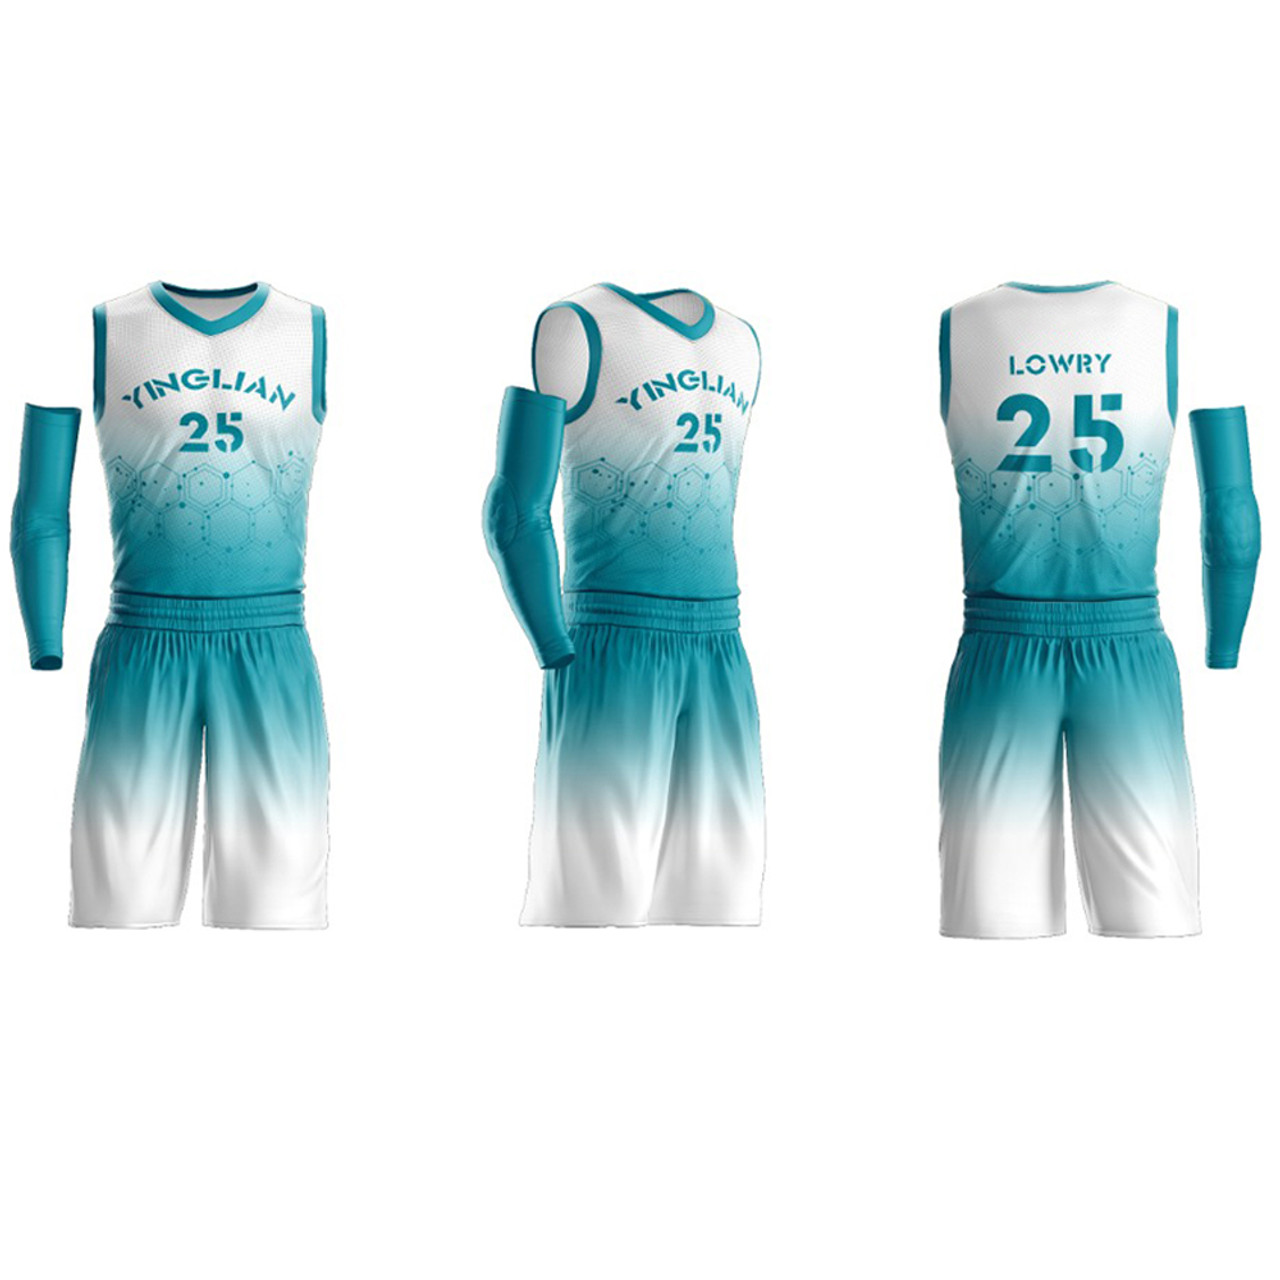 custom team basketball jerseys instock unifroms print with name and number  ,kids&men's basketball uniform 25